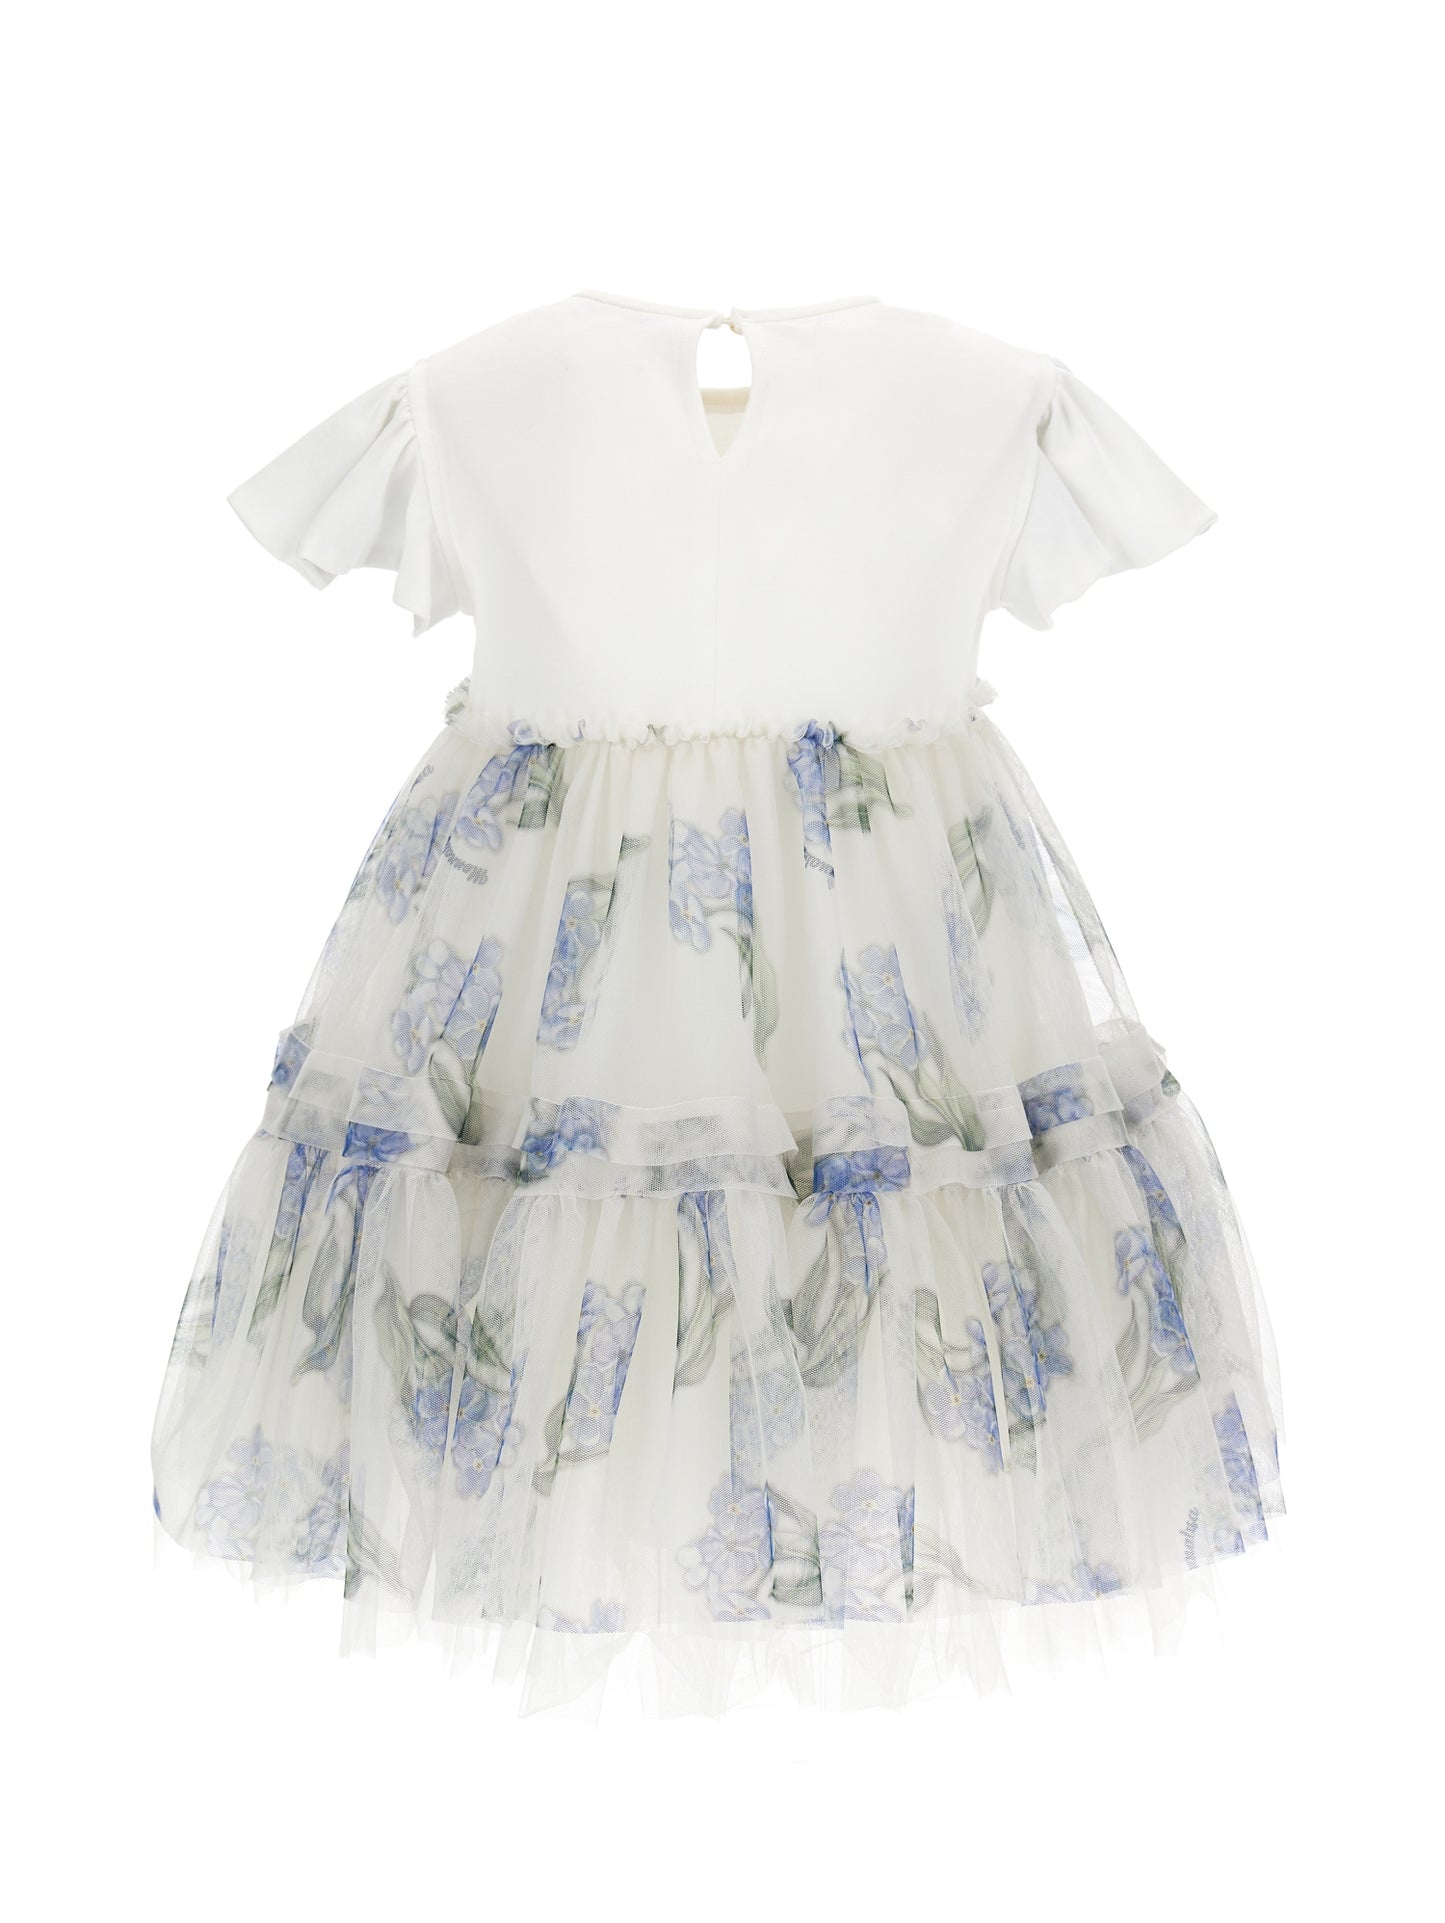 Monnalisa High Waisted Floral Tulle Dress